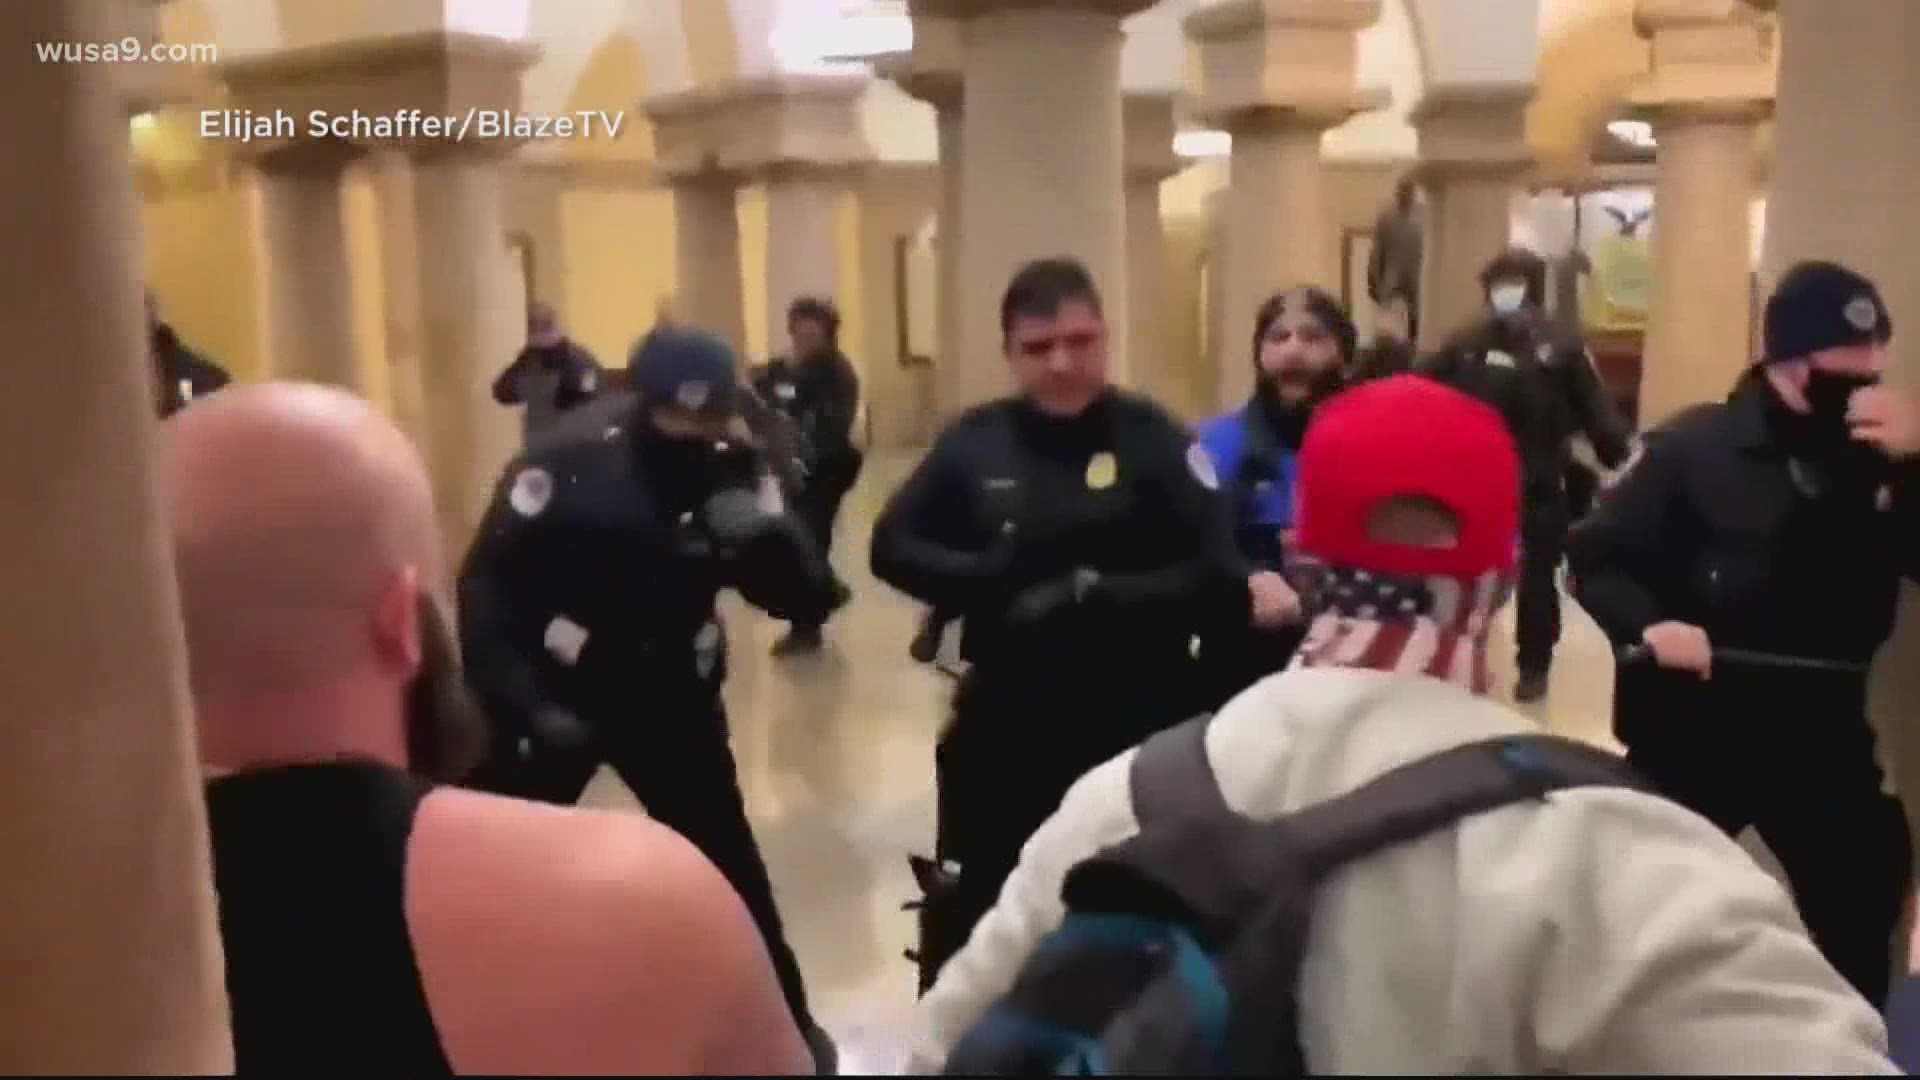 In addition to those who have been charged, U.S. Capitol police say additional complaints have been submitted and investigations are ongoing.